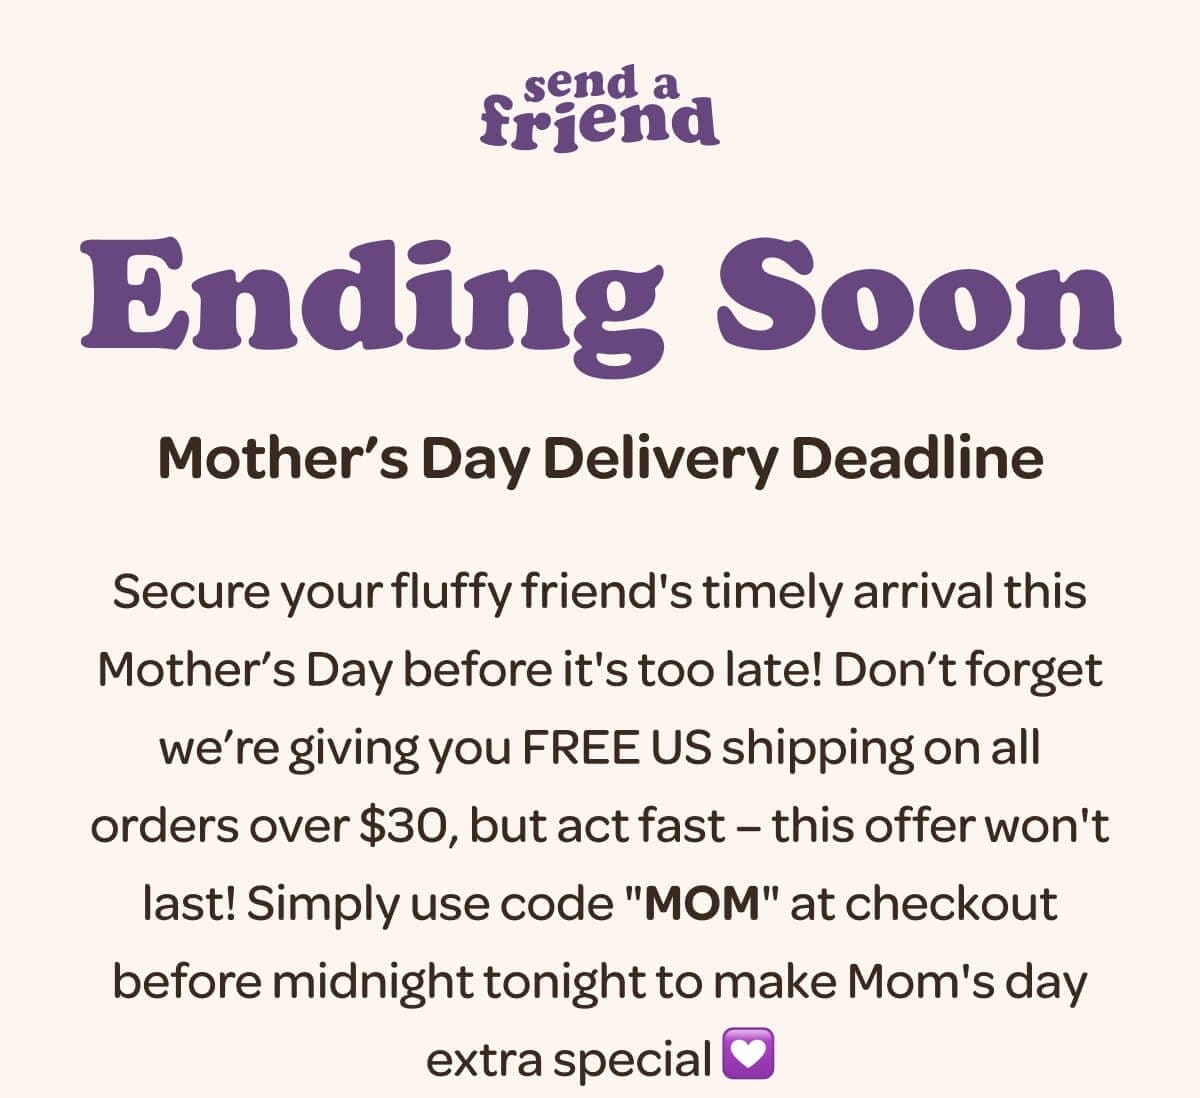 Ending Soon. Mother’s Day Delivery Deadline. Secure your fluffy friend's timely arrival this Mother’s Day before it's too late! Don’t forget we’re giving you FREE US shipping on all orders over \\$30, but act fast – this offer won't last! Simply use code "MOM" at checkout before midnight tonight to make Mom's day extra special 💟